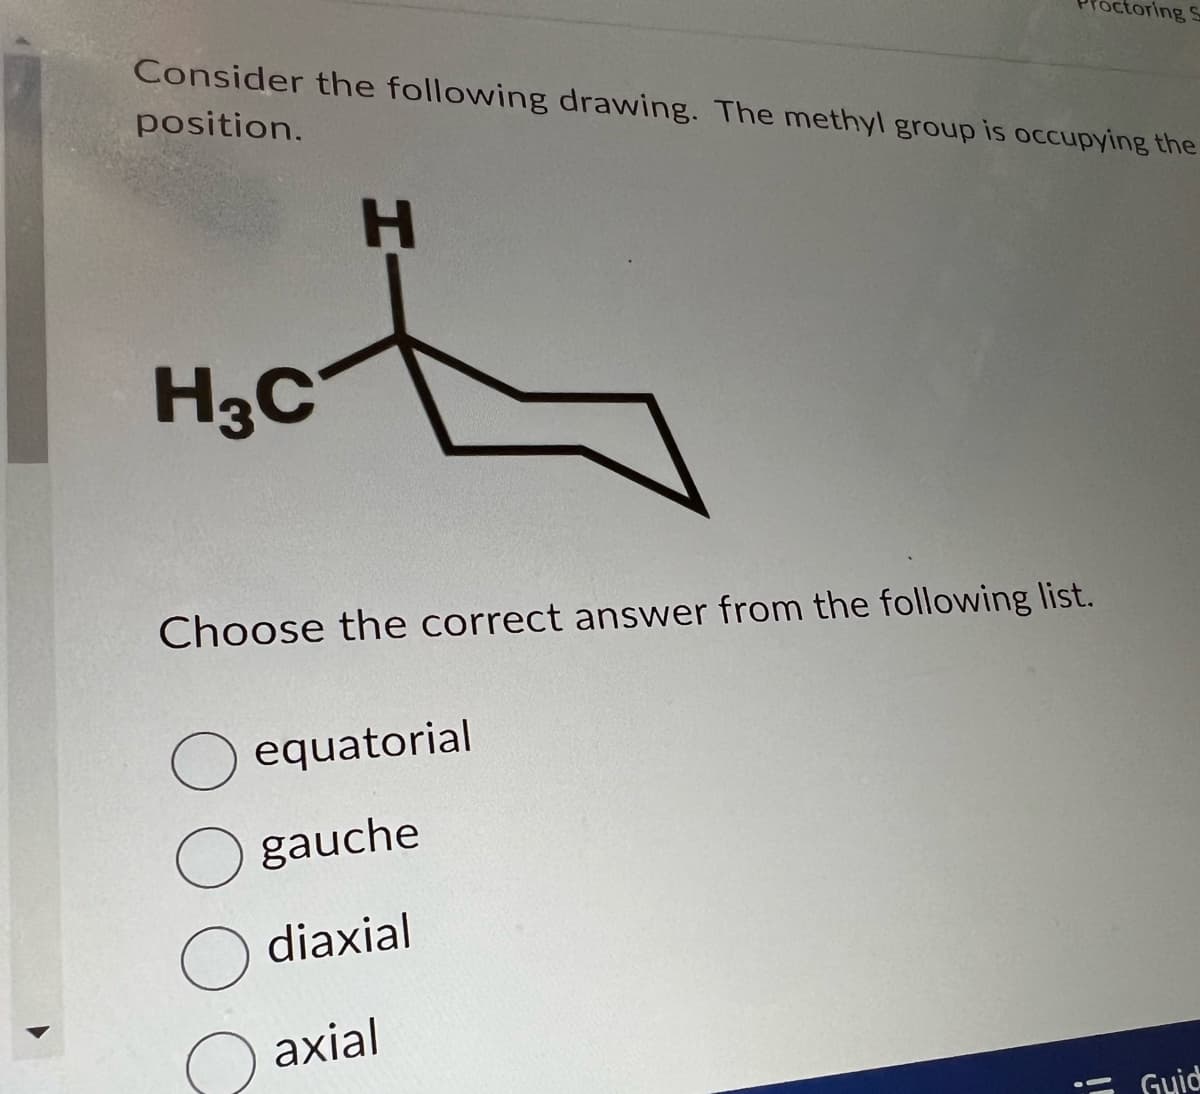 Consider the following drawing. The methyl group is occupying the
position.
H3C
H
Choose the correct answer from the following list.
octoring S
O equatorial
O gauche
O diaxial
axial
Guid